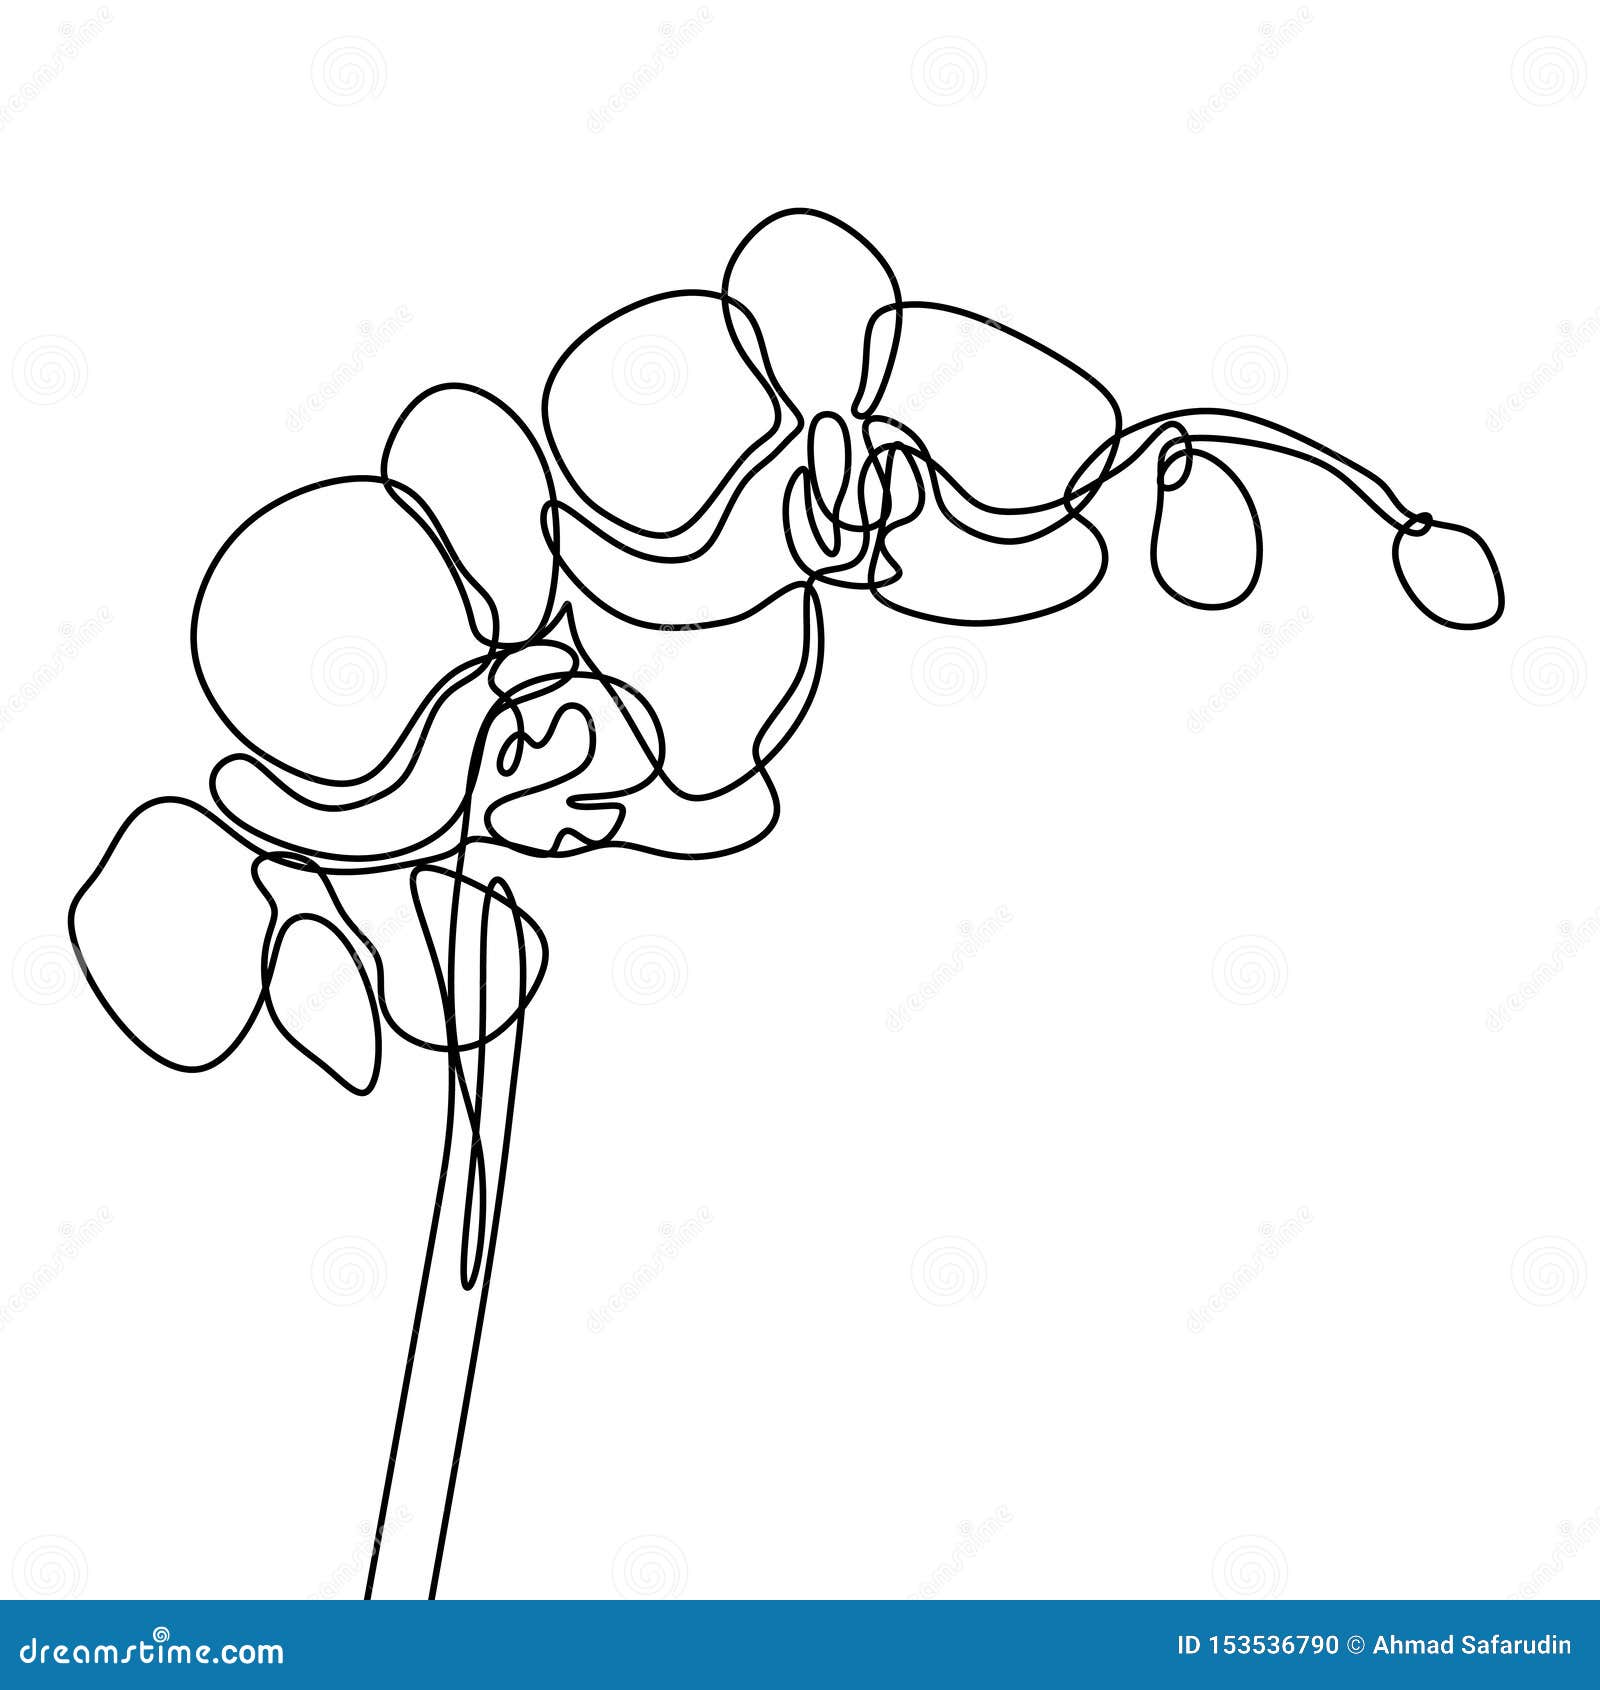 https://thumbs.dreamstime.com/z/hand-drawn-orchid-flower-one-line-drawing-continuous-illustration-vector-minimalist-art-design-minimalism-white-background-153536790.jpg